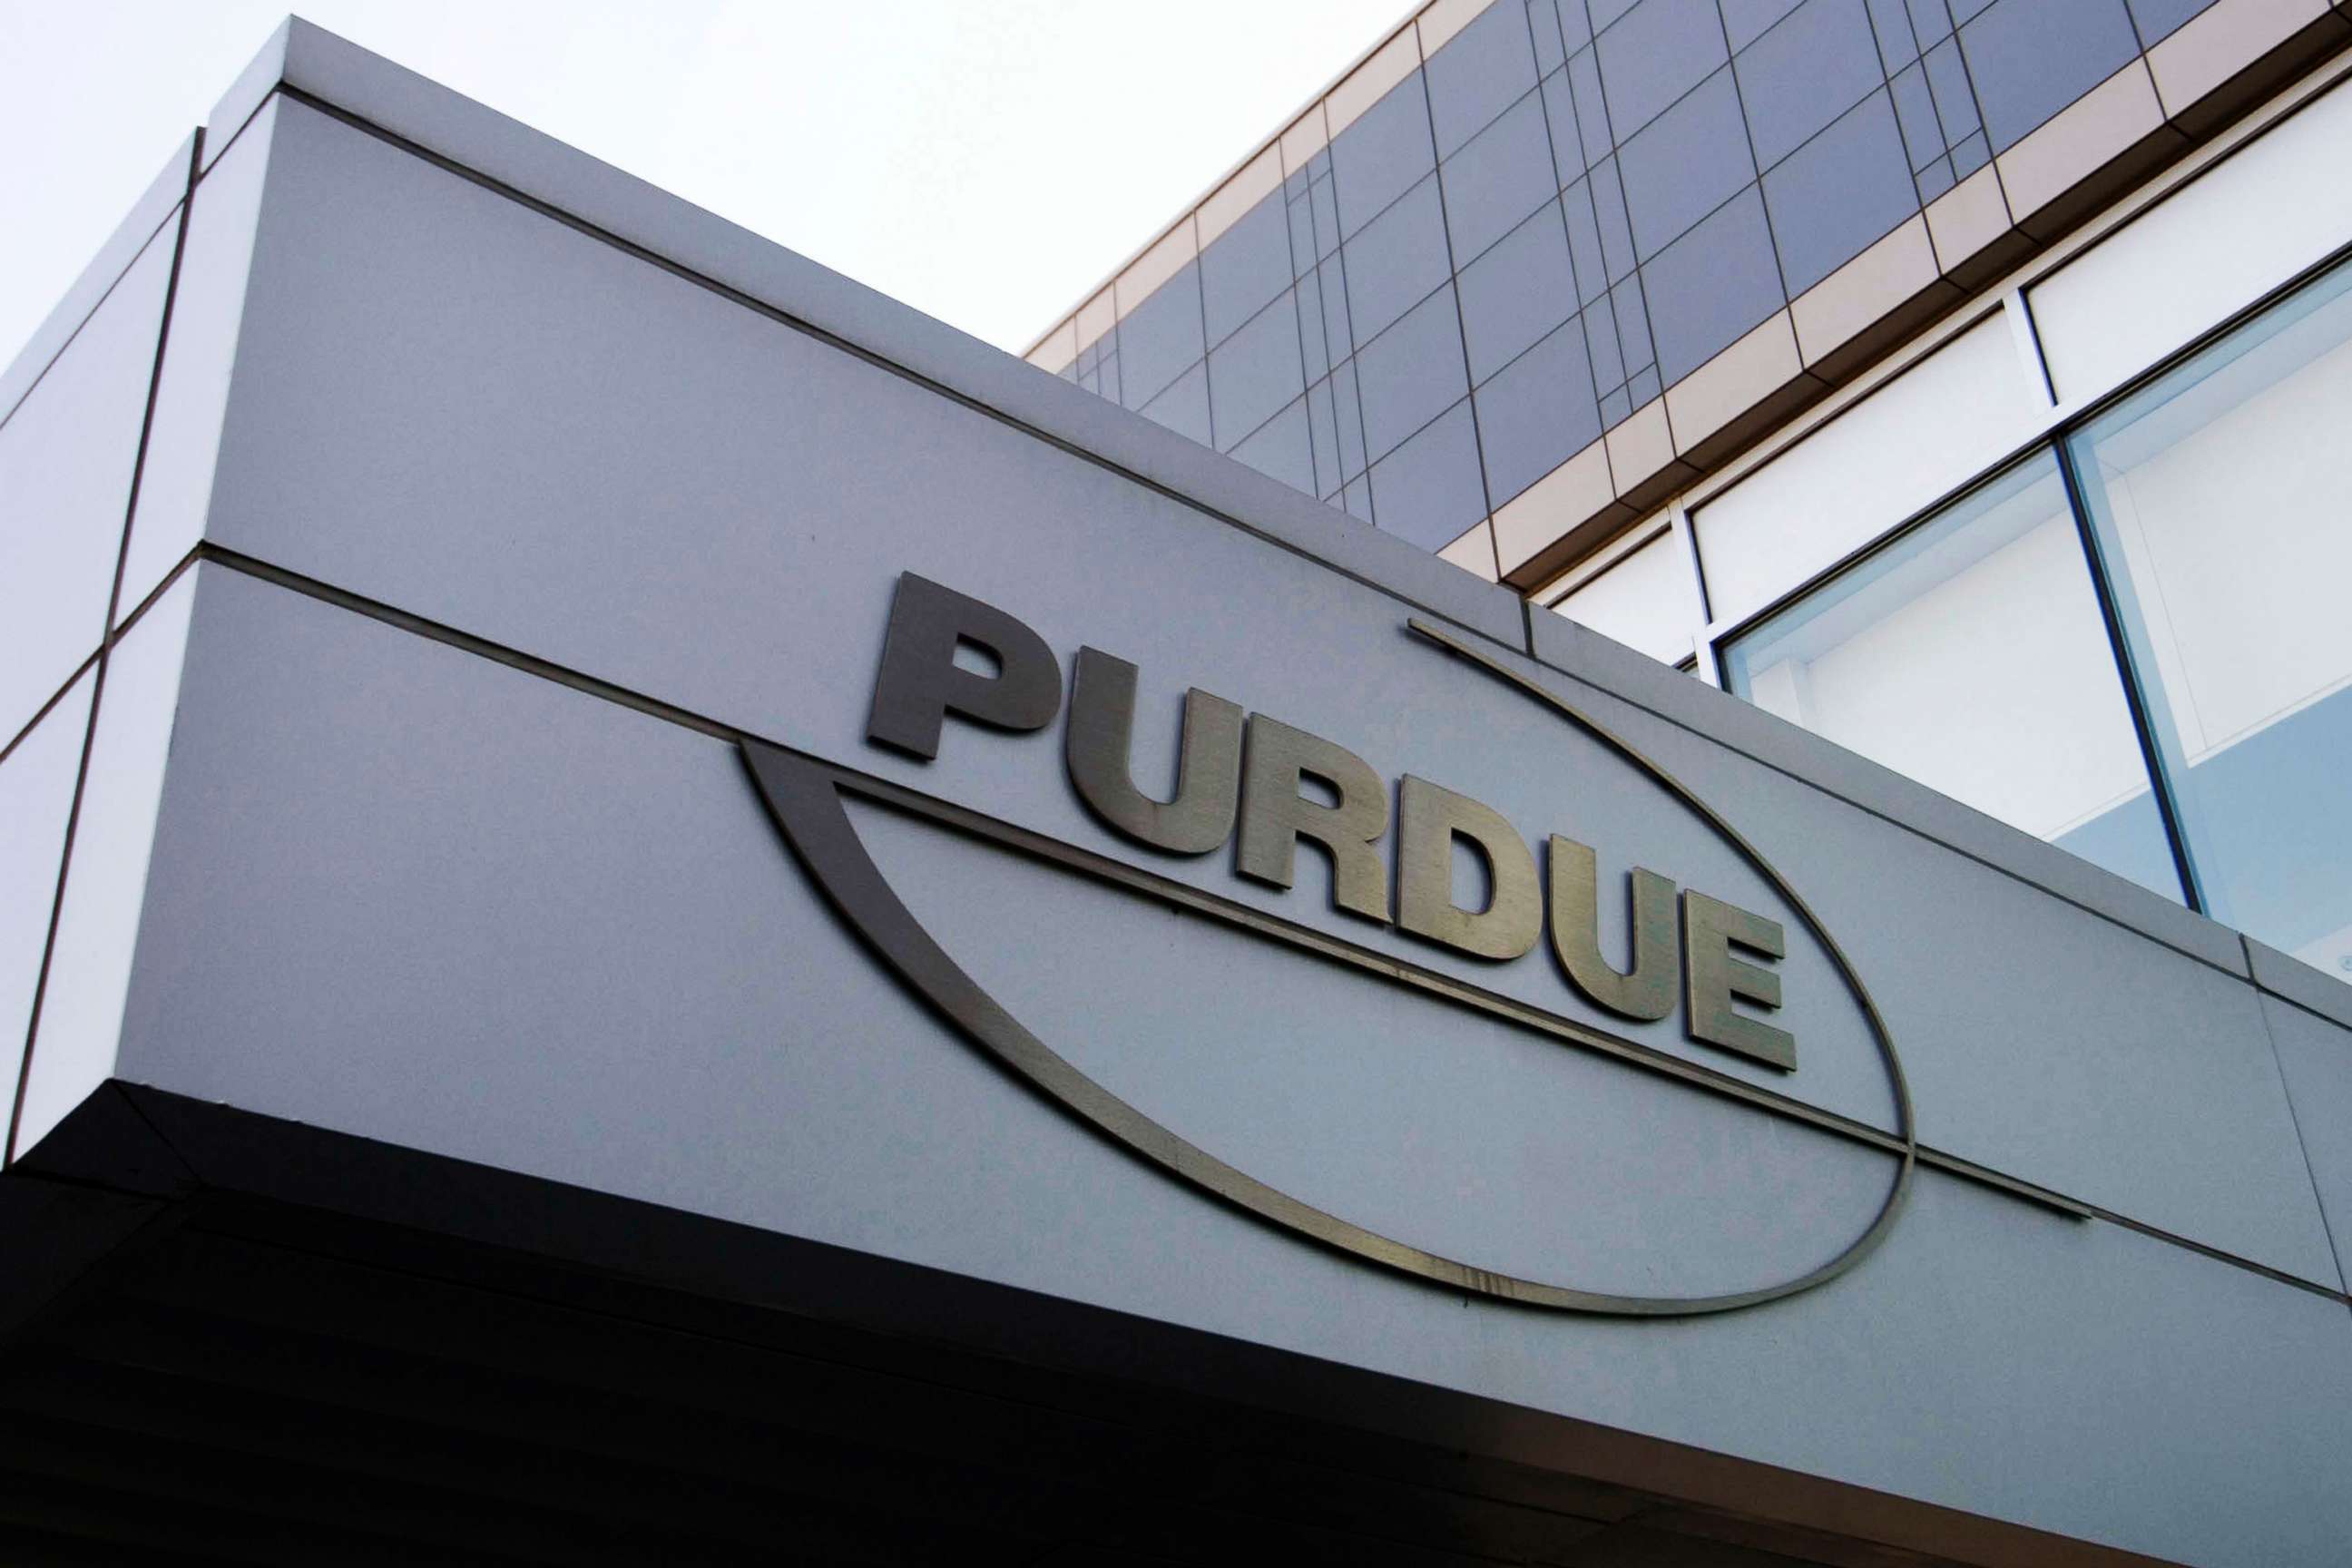 PHOTO: This May 8, 2007 file photo shows the Purdue Pharma logo at its offices in Stamford, Conn.